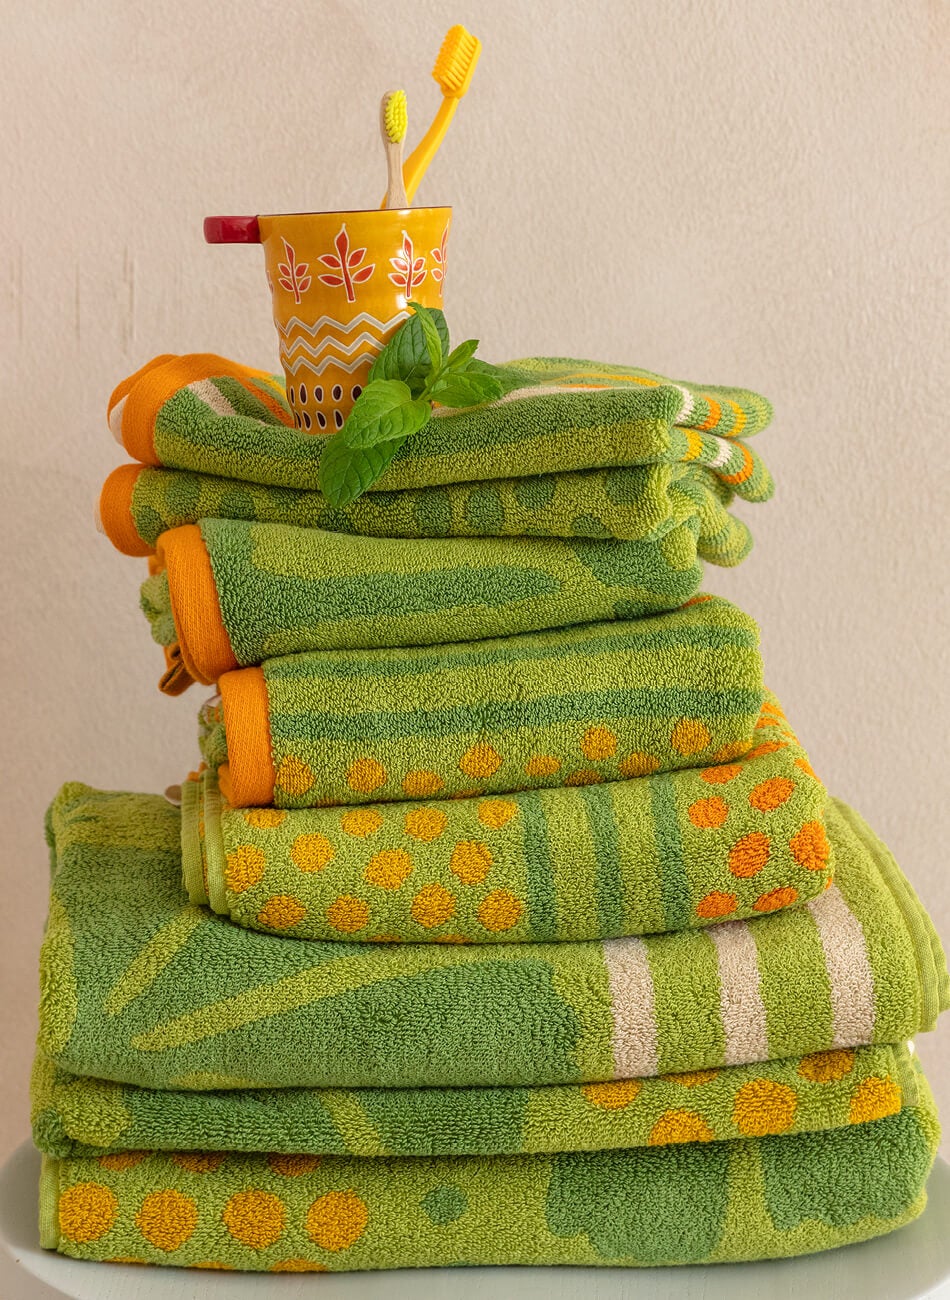 Terry towels